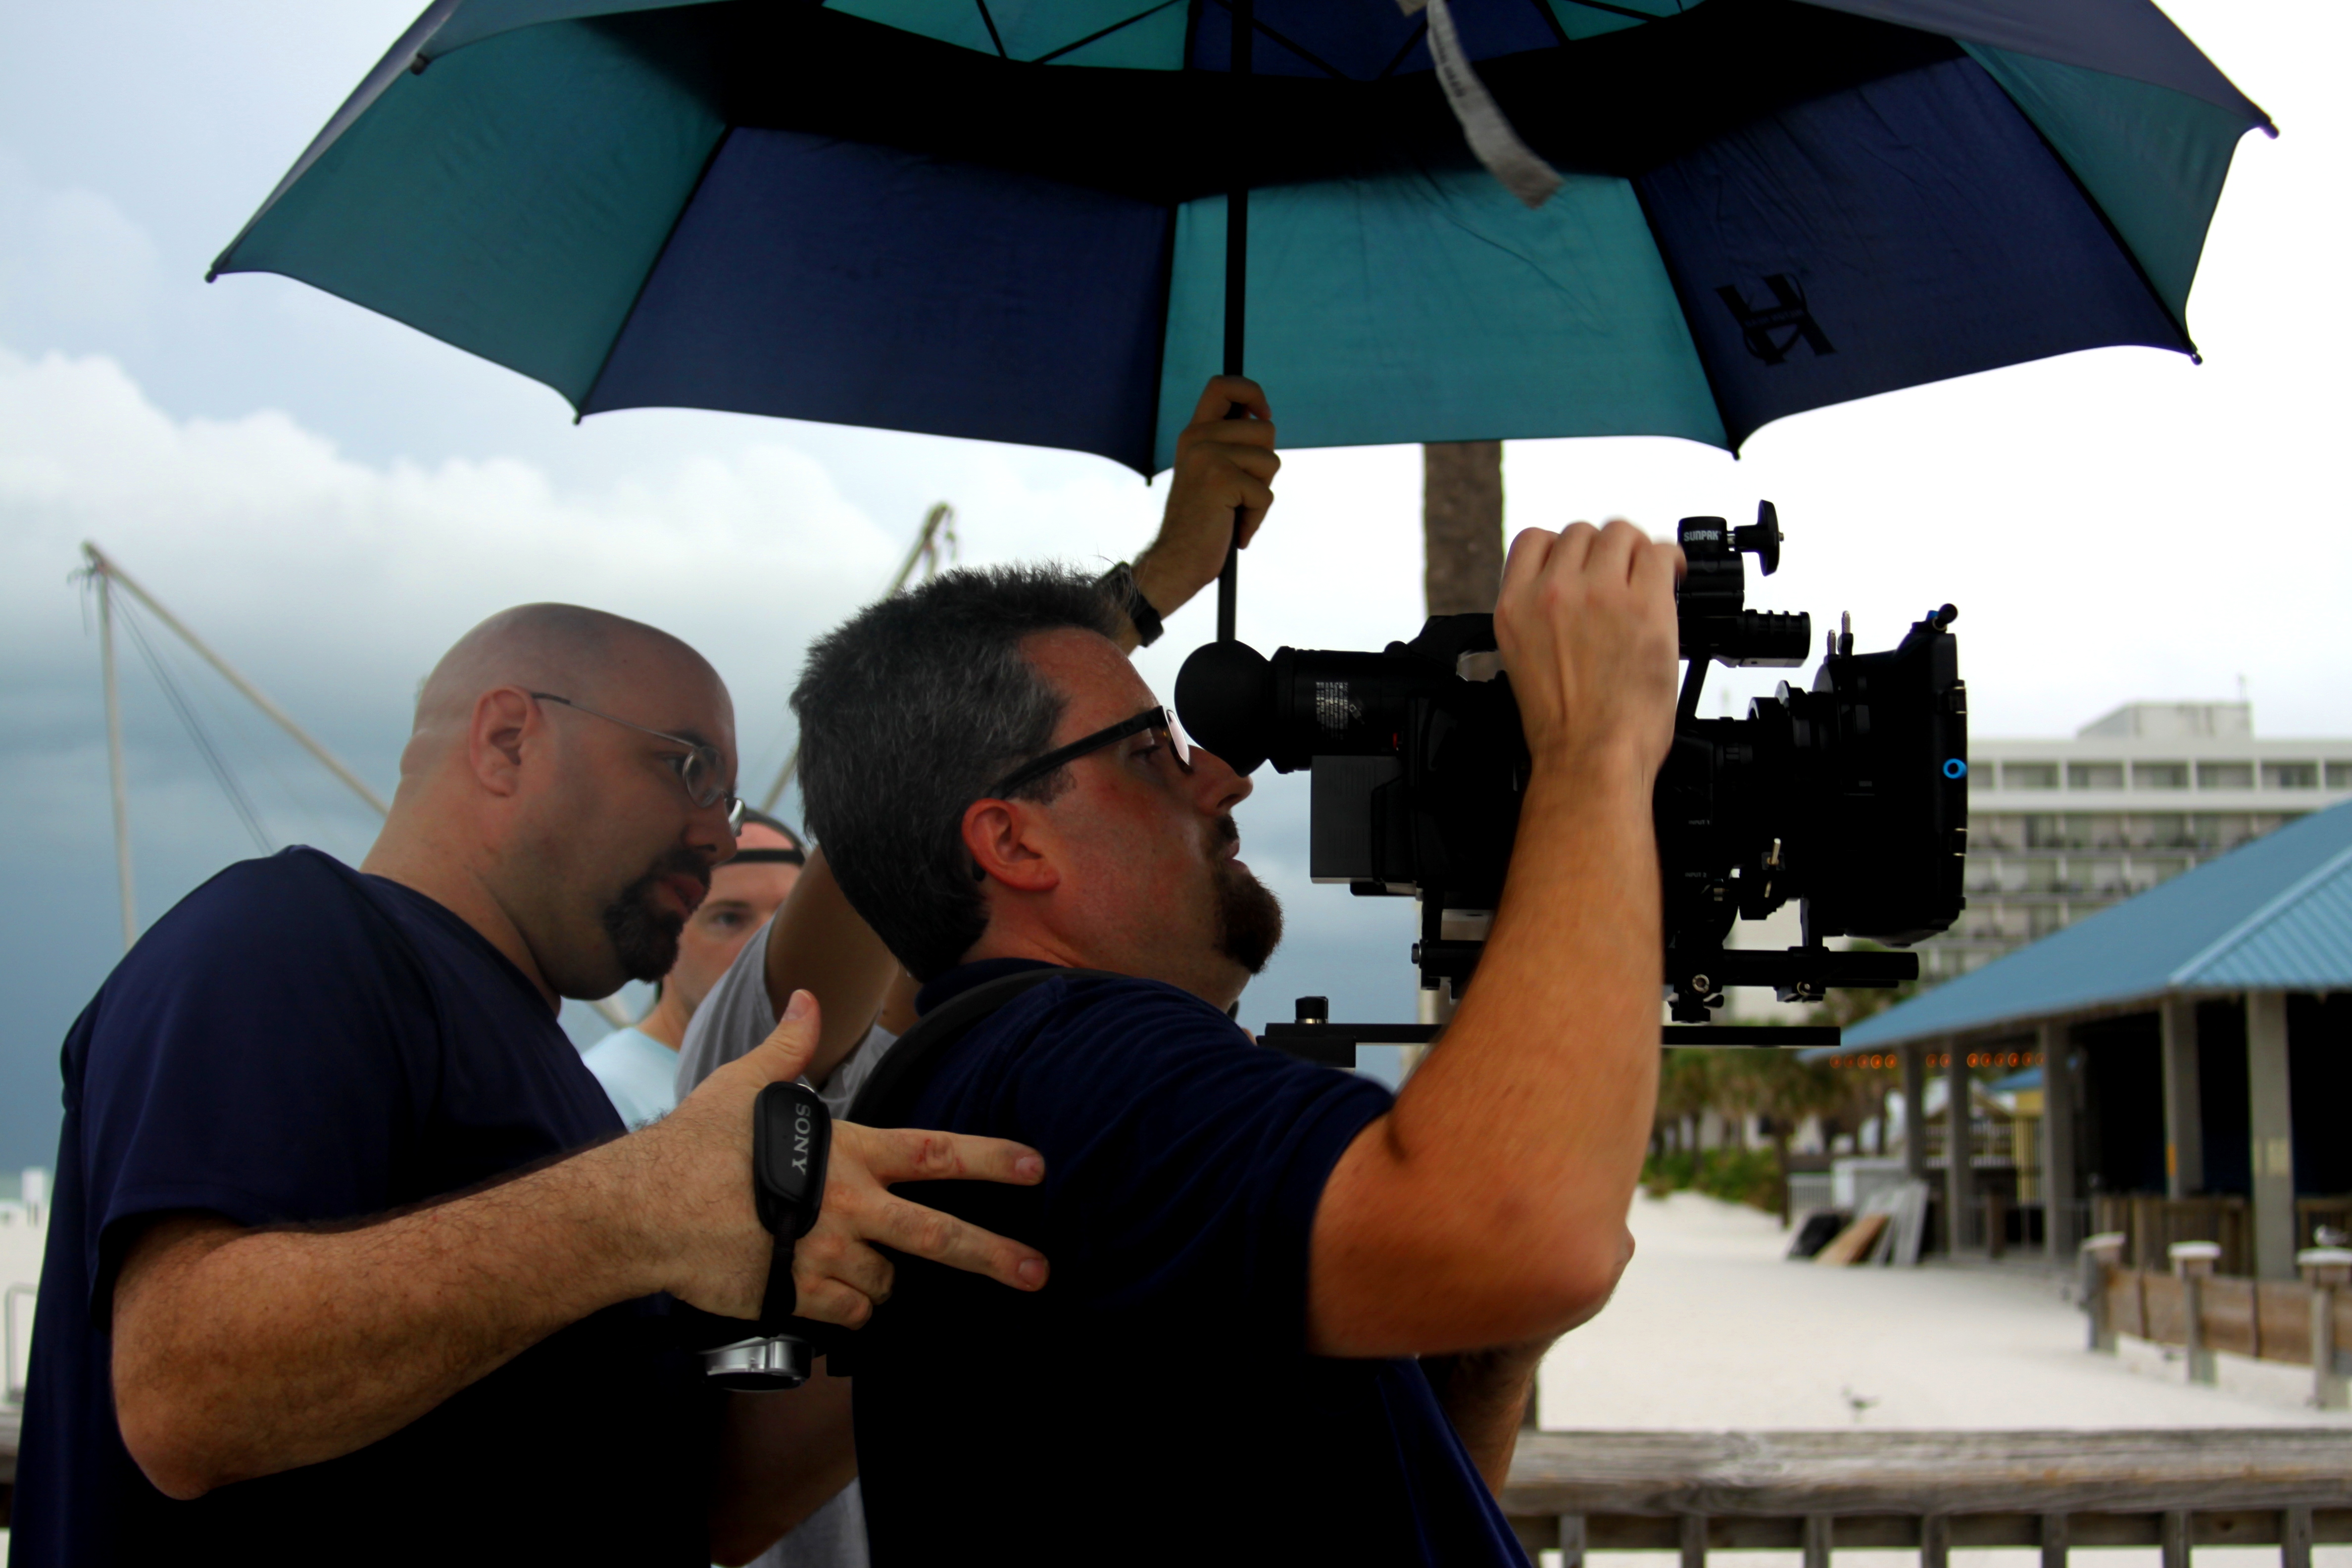 Director Donald E. Reynolds watches through the camera as it rains on an early morning 